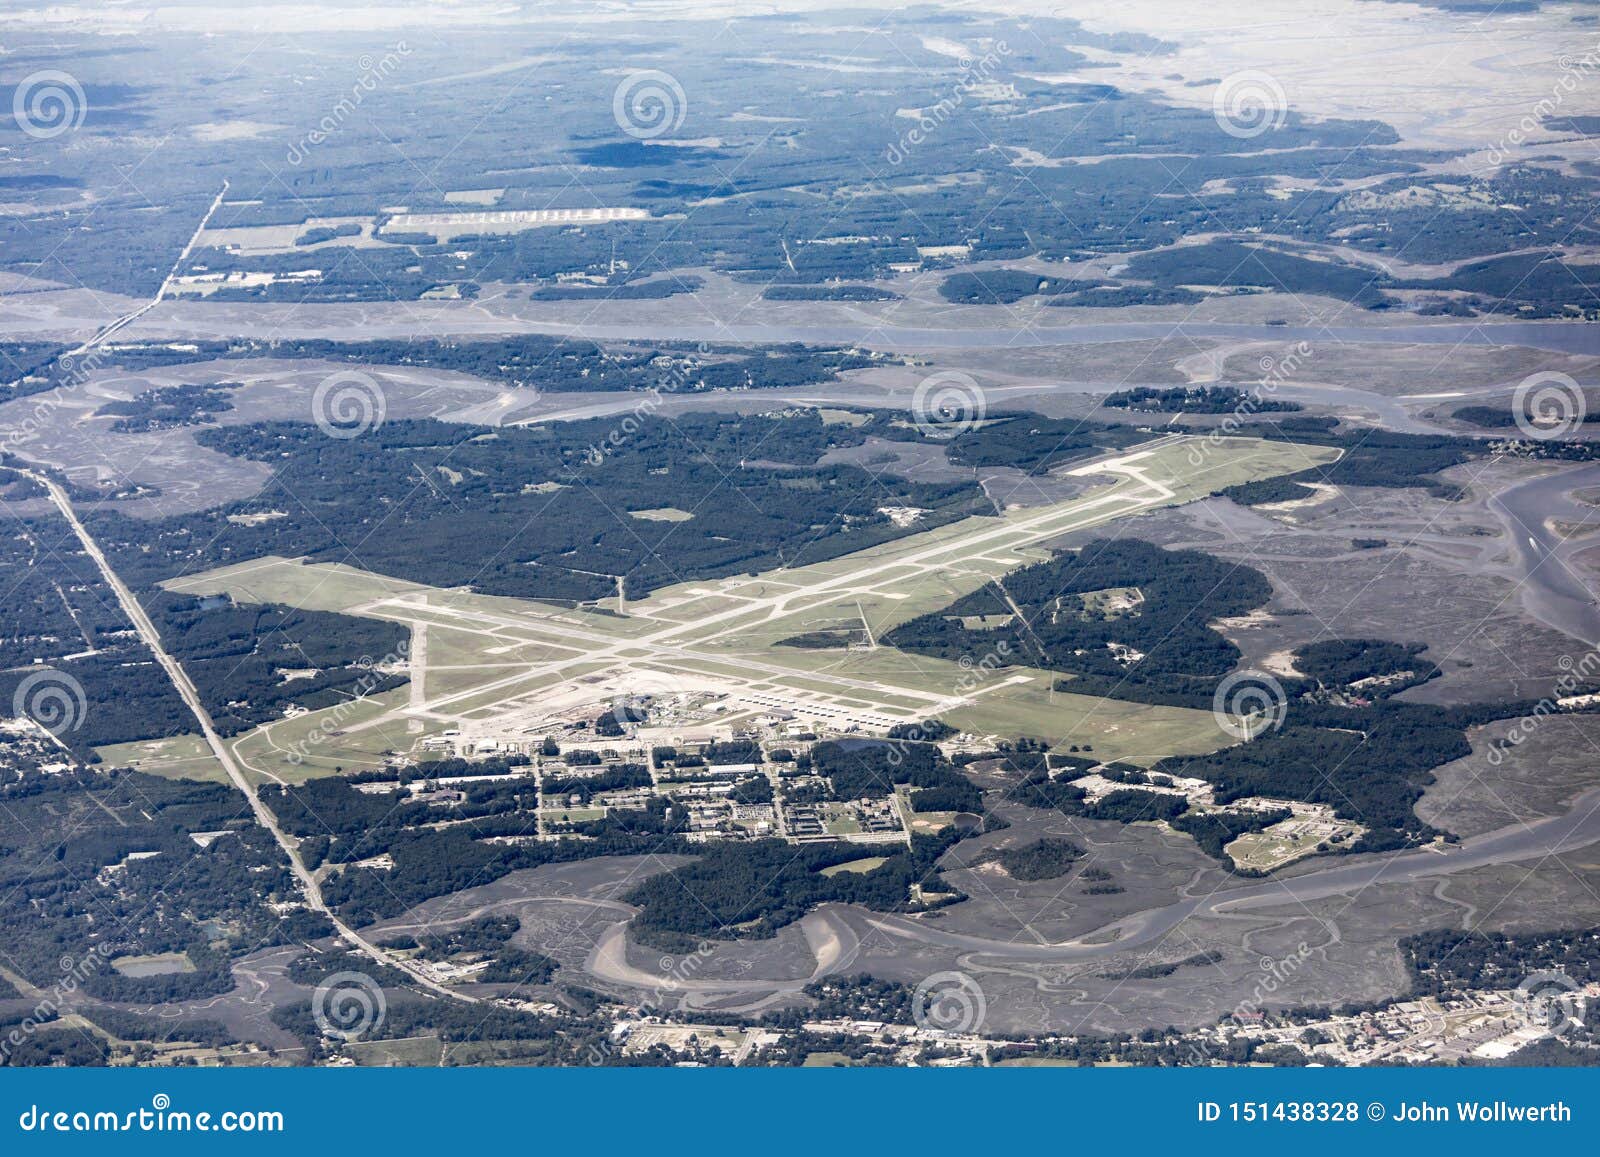 high angle view of the marine corp air station and runways in beaufort, south carolina